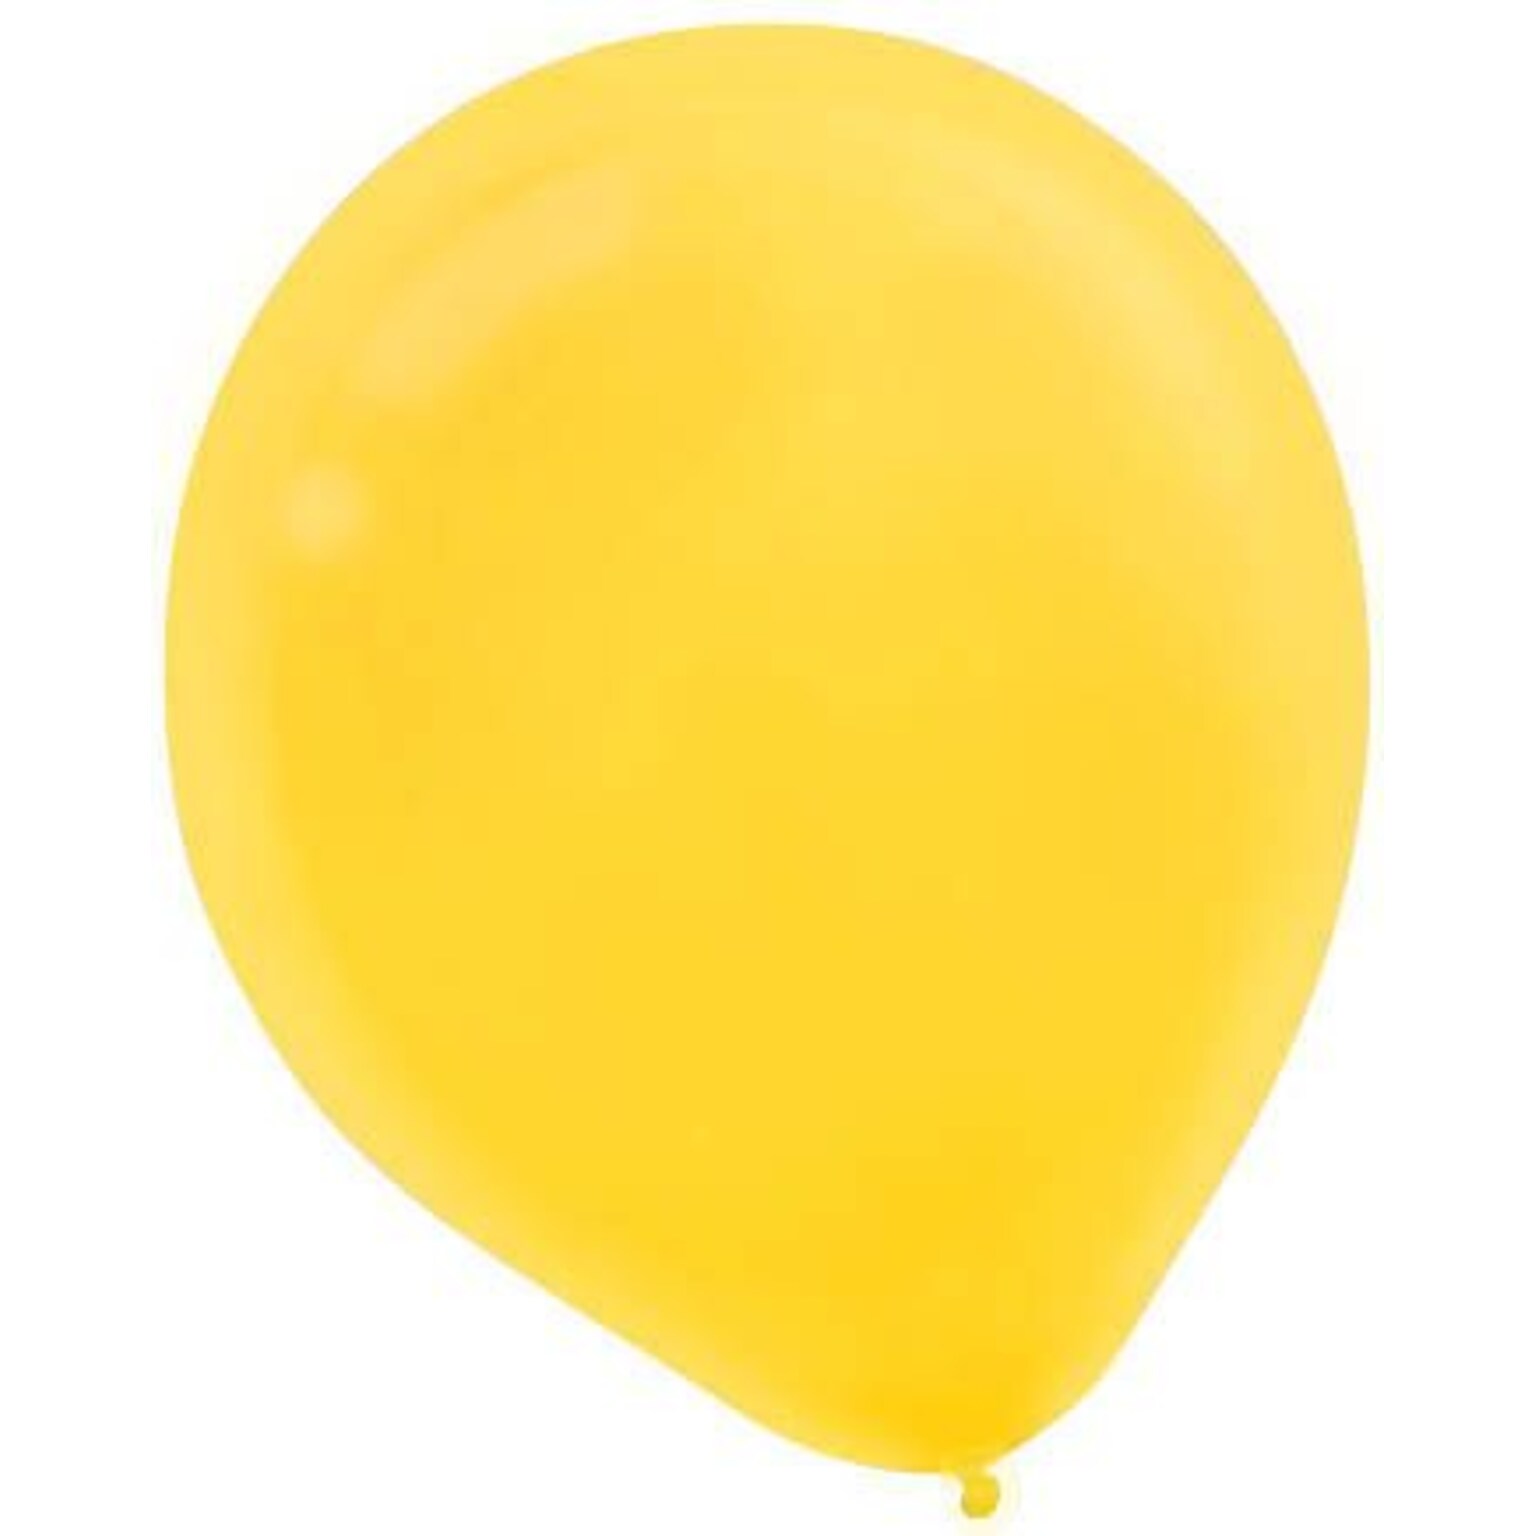 Amscan Solid Color Latex Balloons Packaged, 9, 18/Pack, Yellow Sunshine, 20 Per Pack (113255.09)